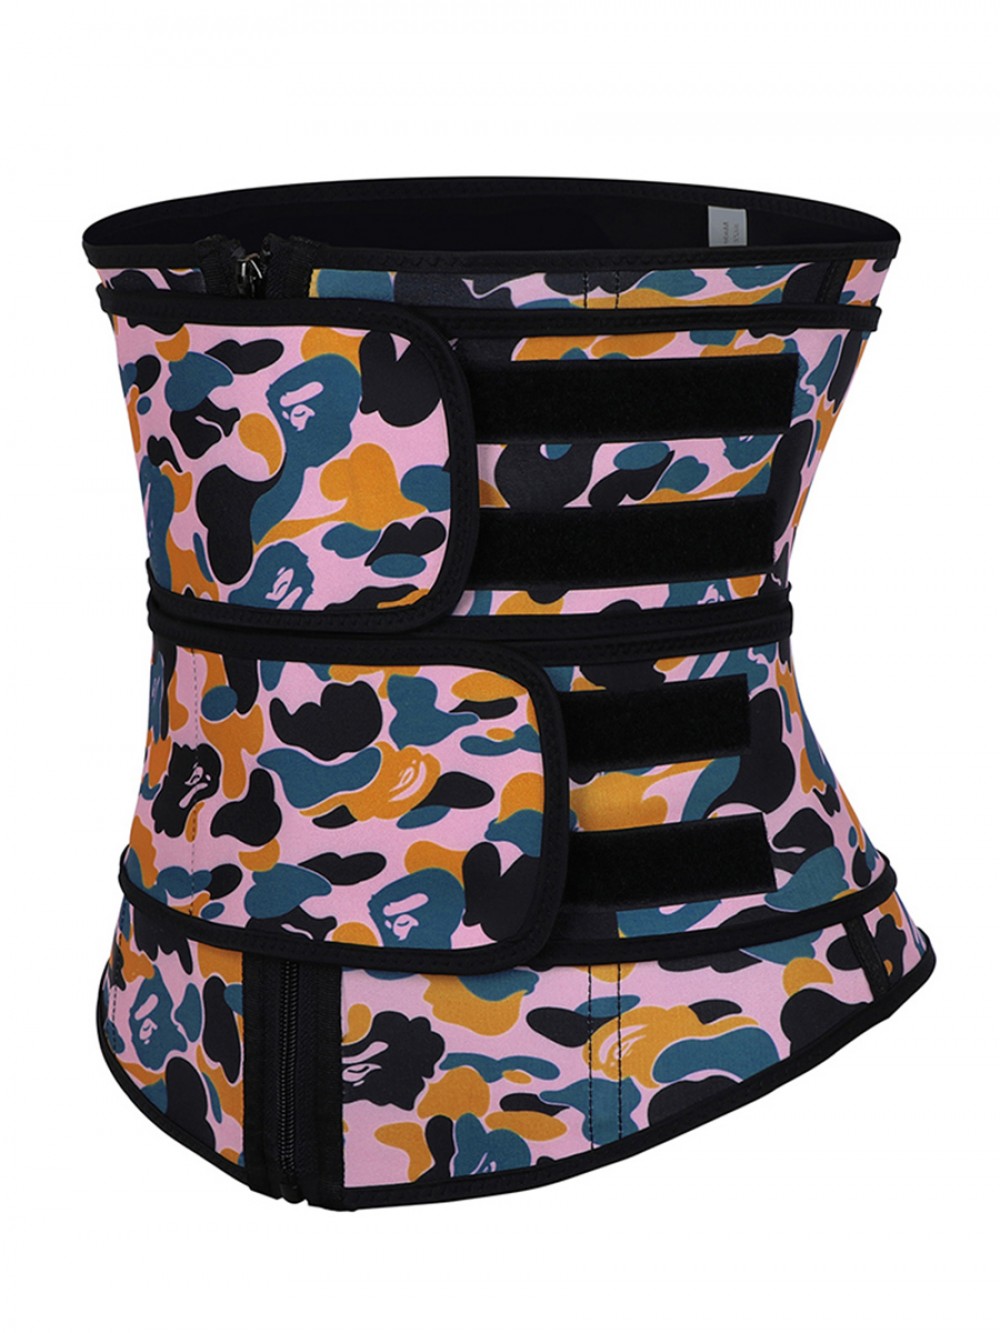 Best Latex Waist Trainer Camo Printed Double Belts Weight Loss